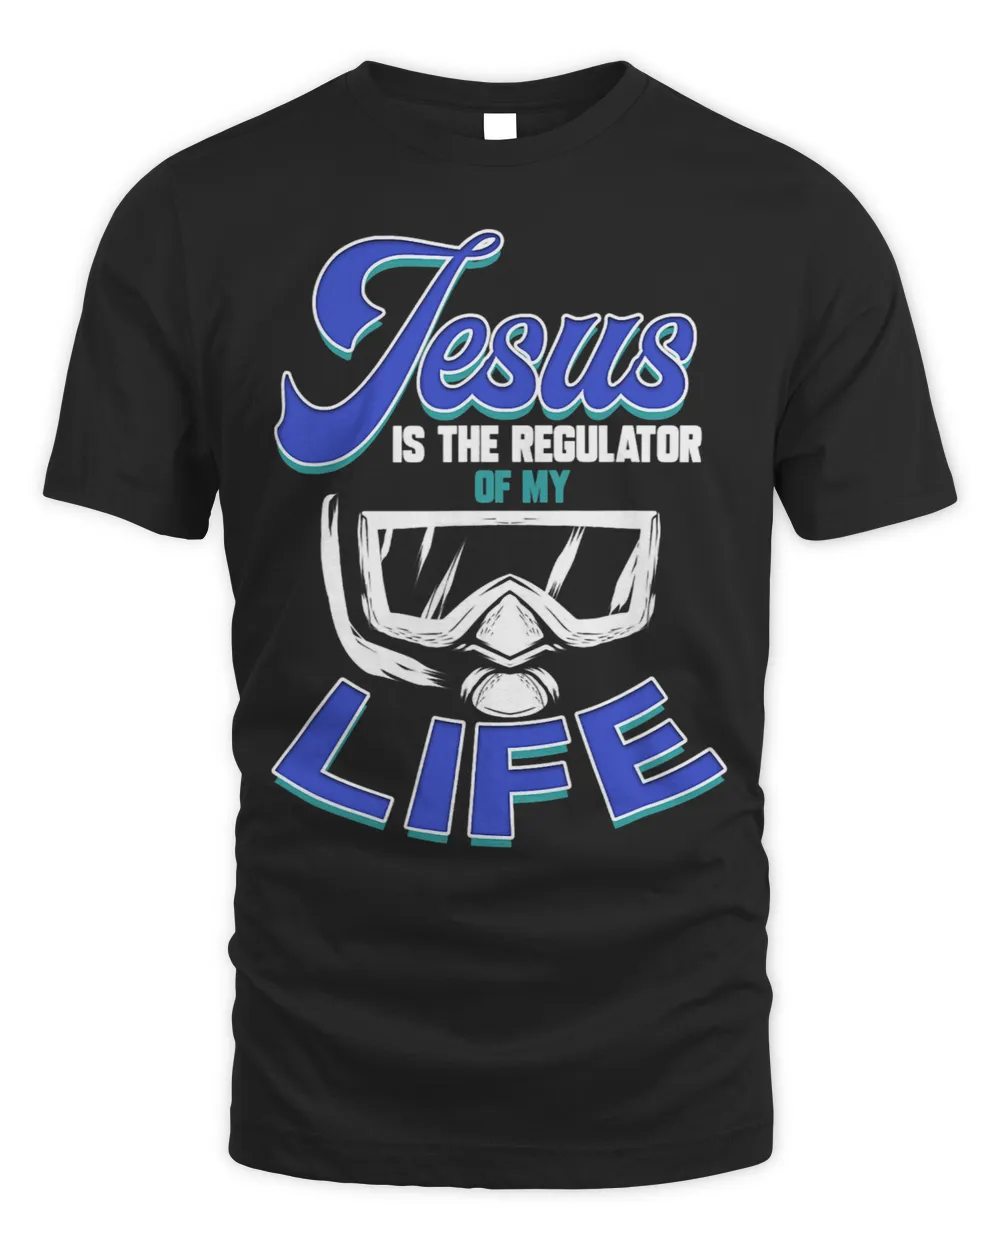 Christian Scuba Diver Gift Jesus Is The Regulator of My Life